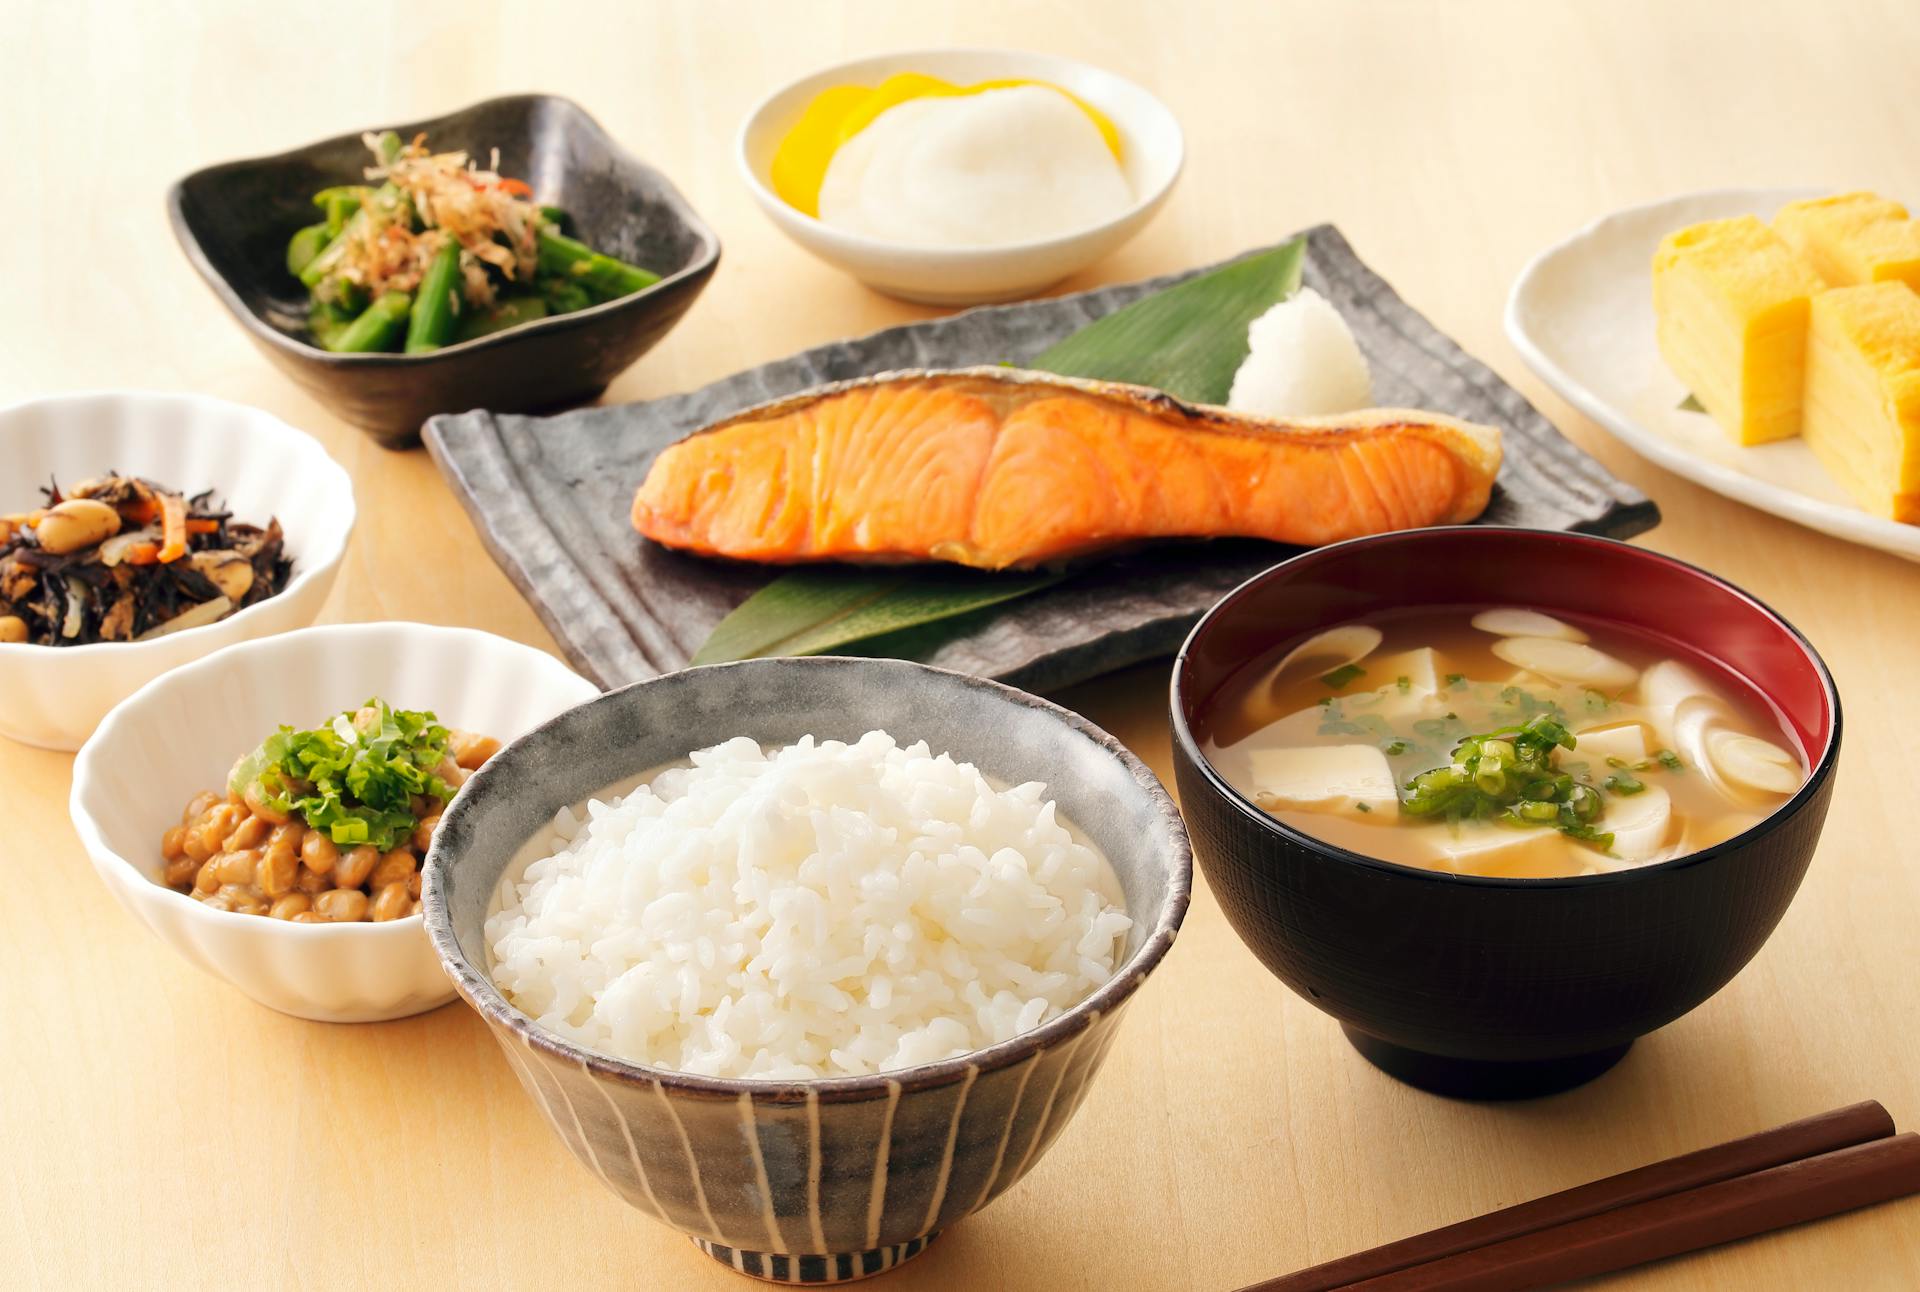 Traditional Japanese diet associated with less brain shrinkage in women compared to western diet, says research